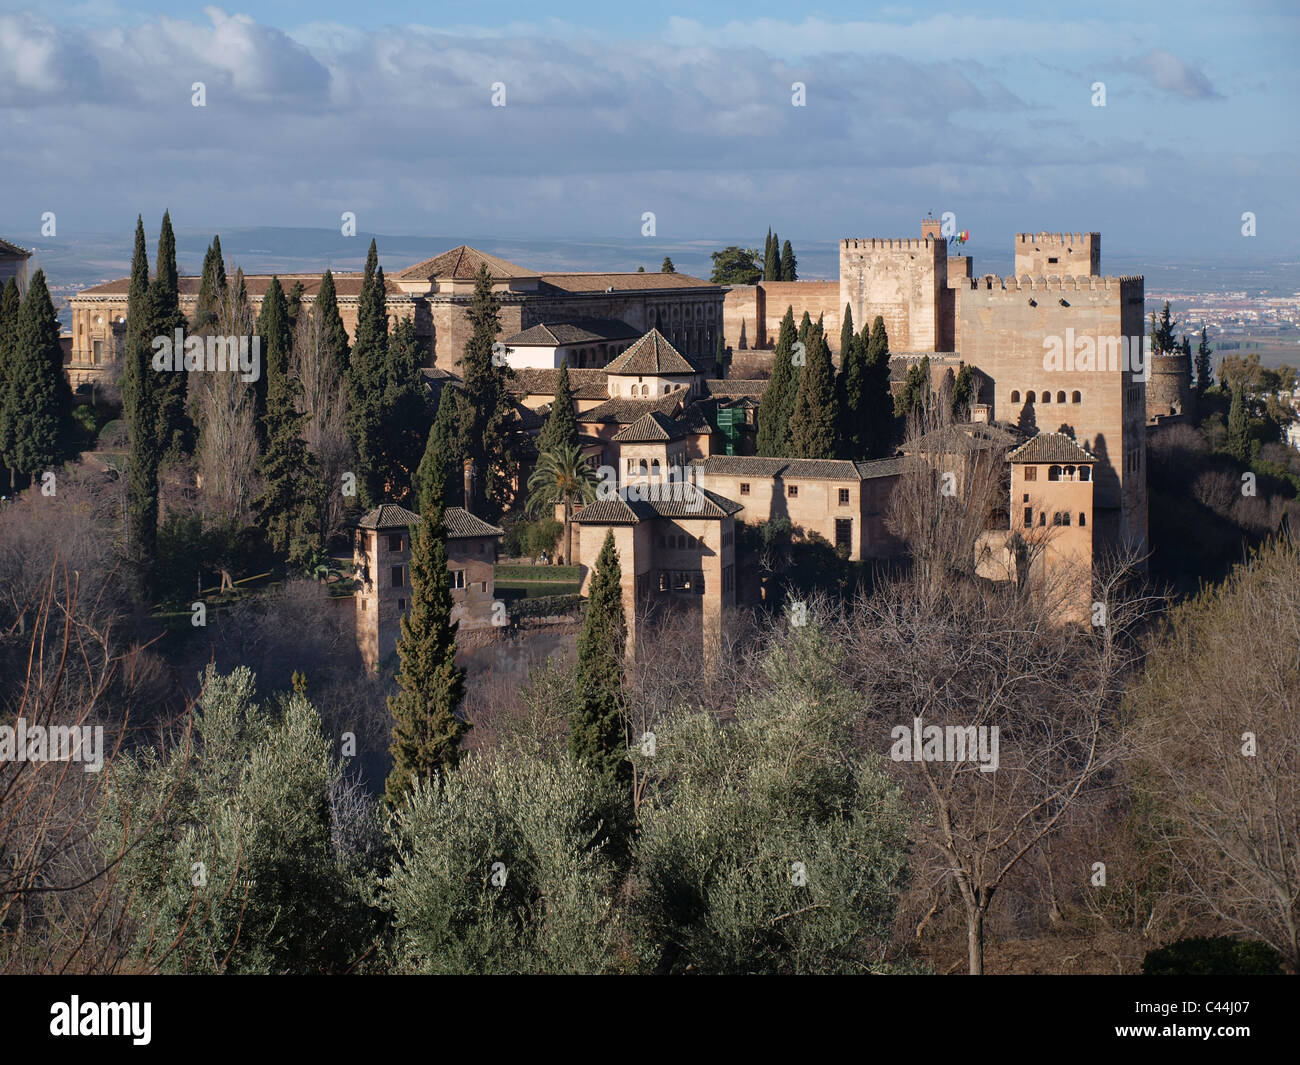 The gardens of the Alhambra, Granada, Spain overlooking the fortifications and Granada. Stock Photo